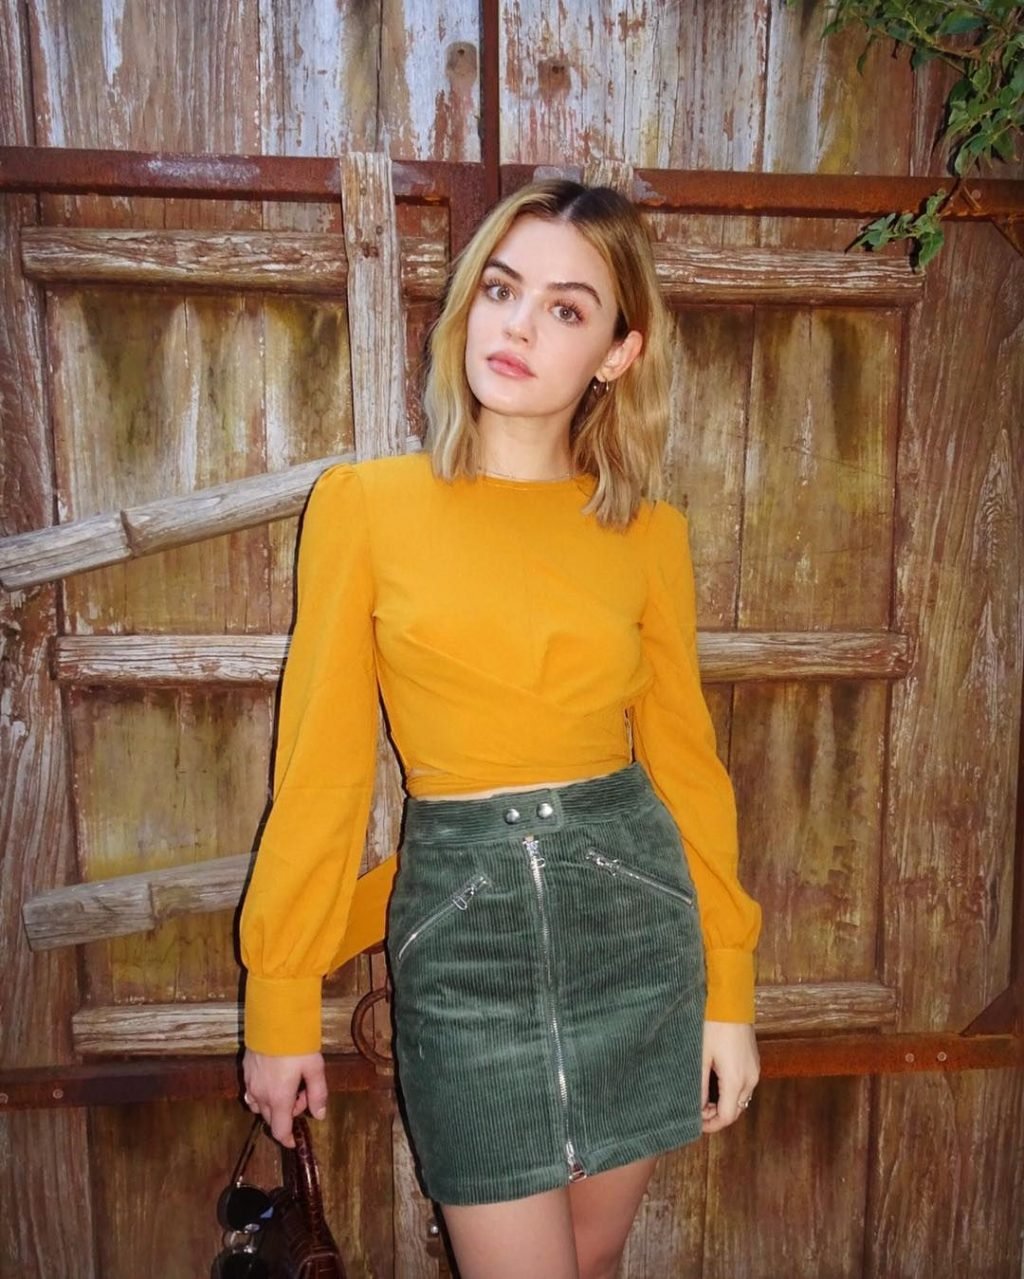 lucy-hale